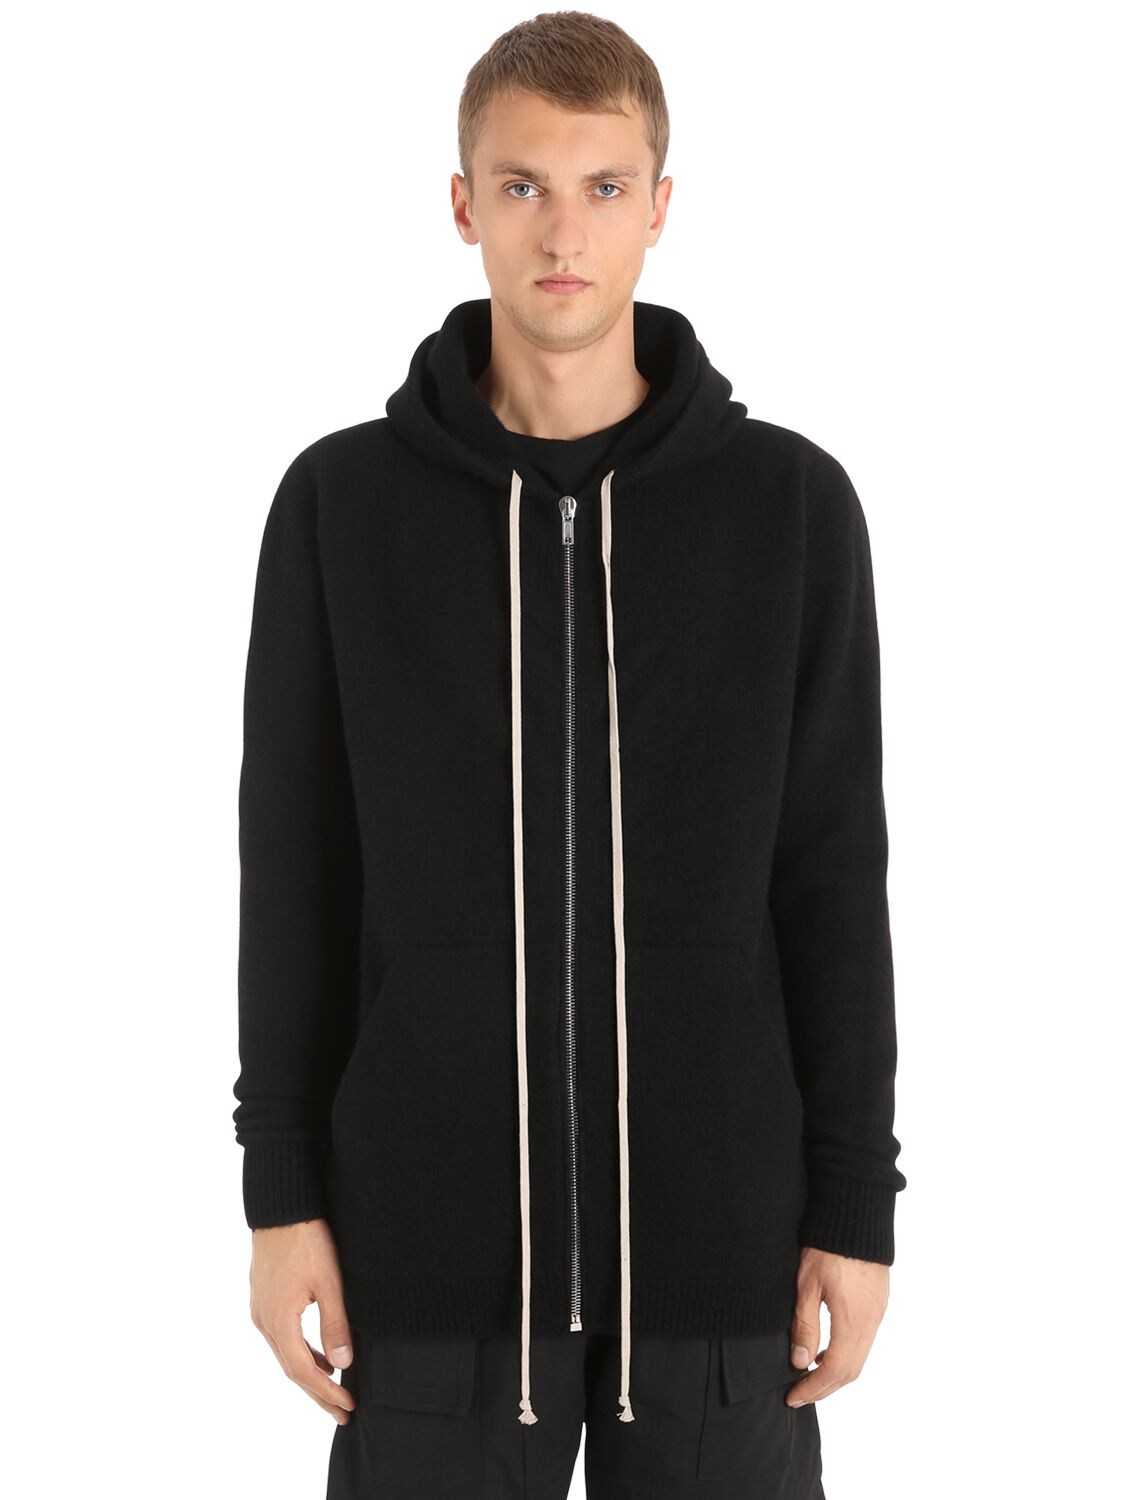 RICK OWENS HOODED ZIP-UP CASHMERE SWEATER,66I0EH002-MDk1